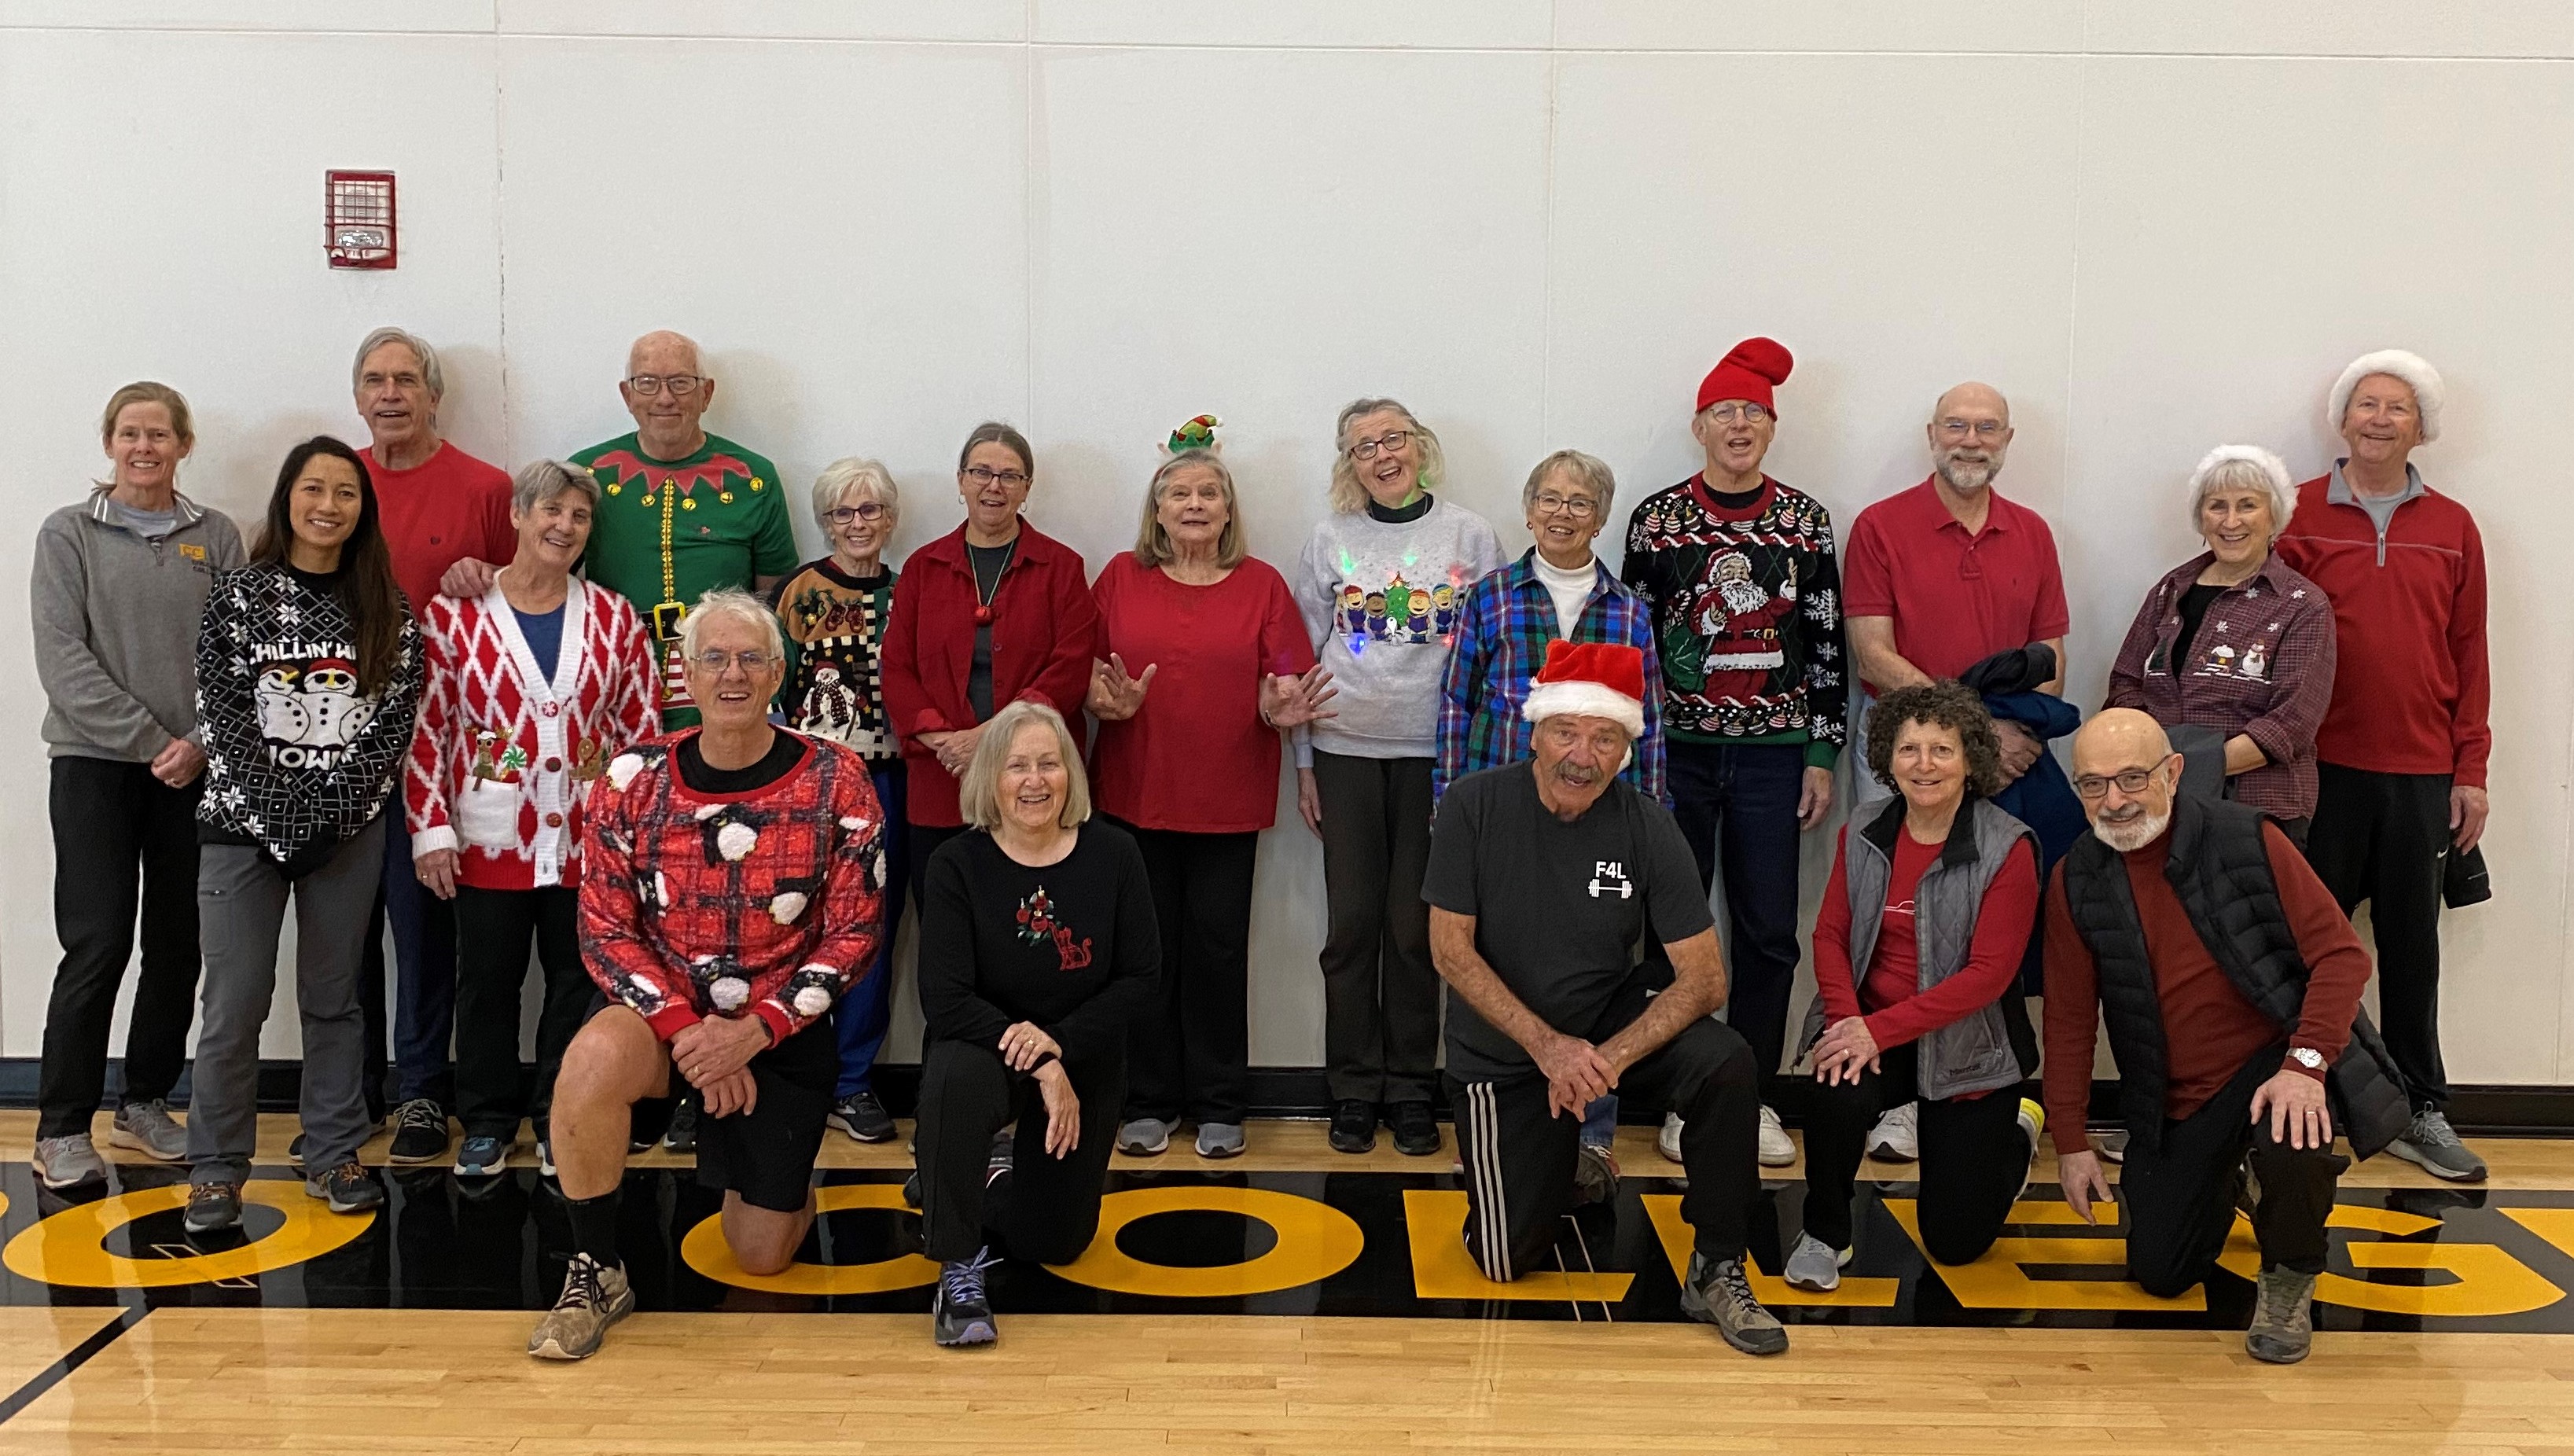 2022 Holiday Fit 4 Life Group Picture <span class="cc-gallery-credit"></span>